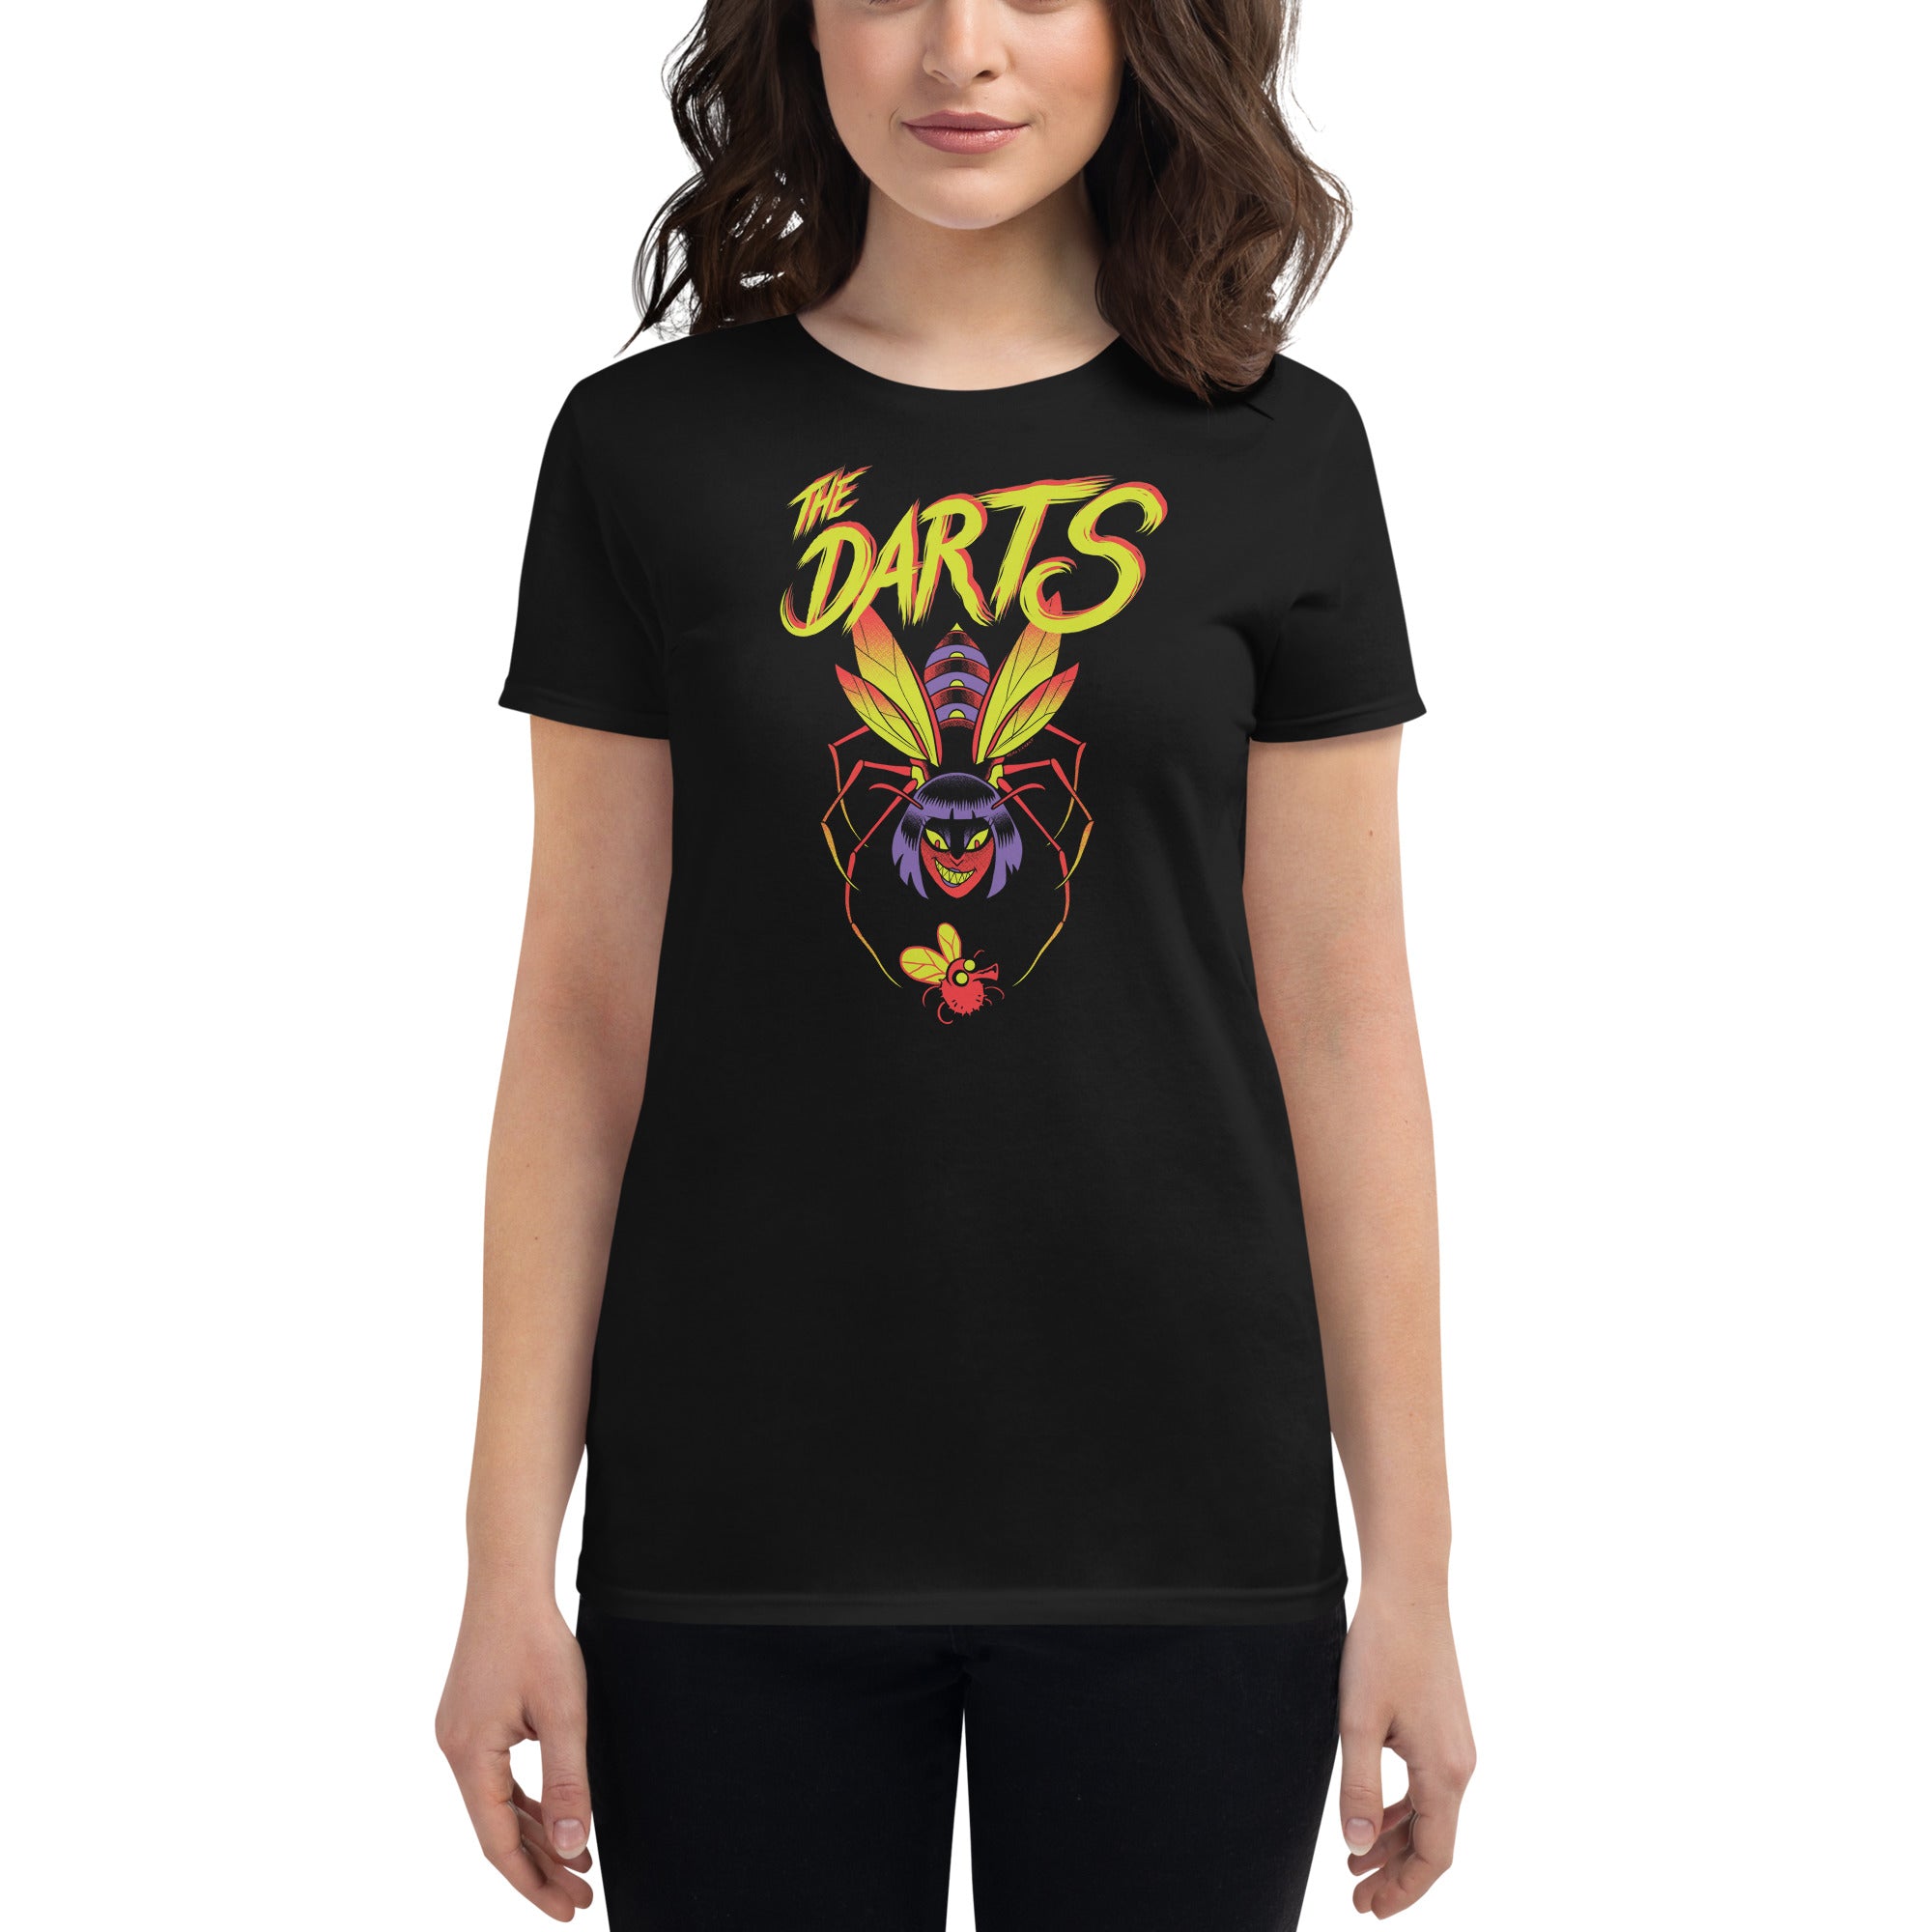 THE DARTS "Bee" Fitted Black T-Shirt